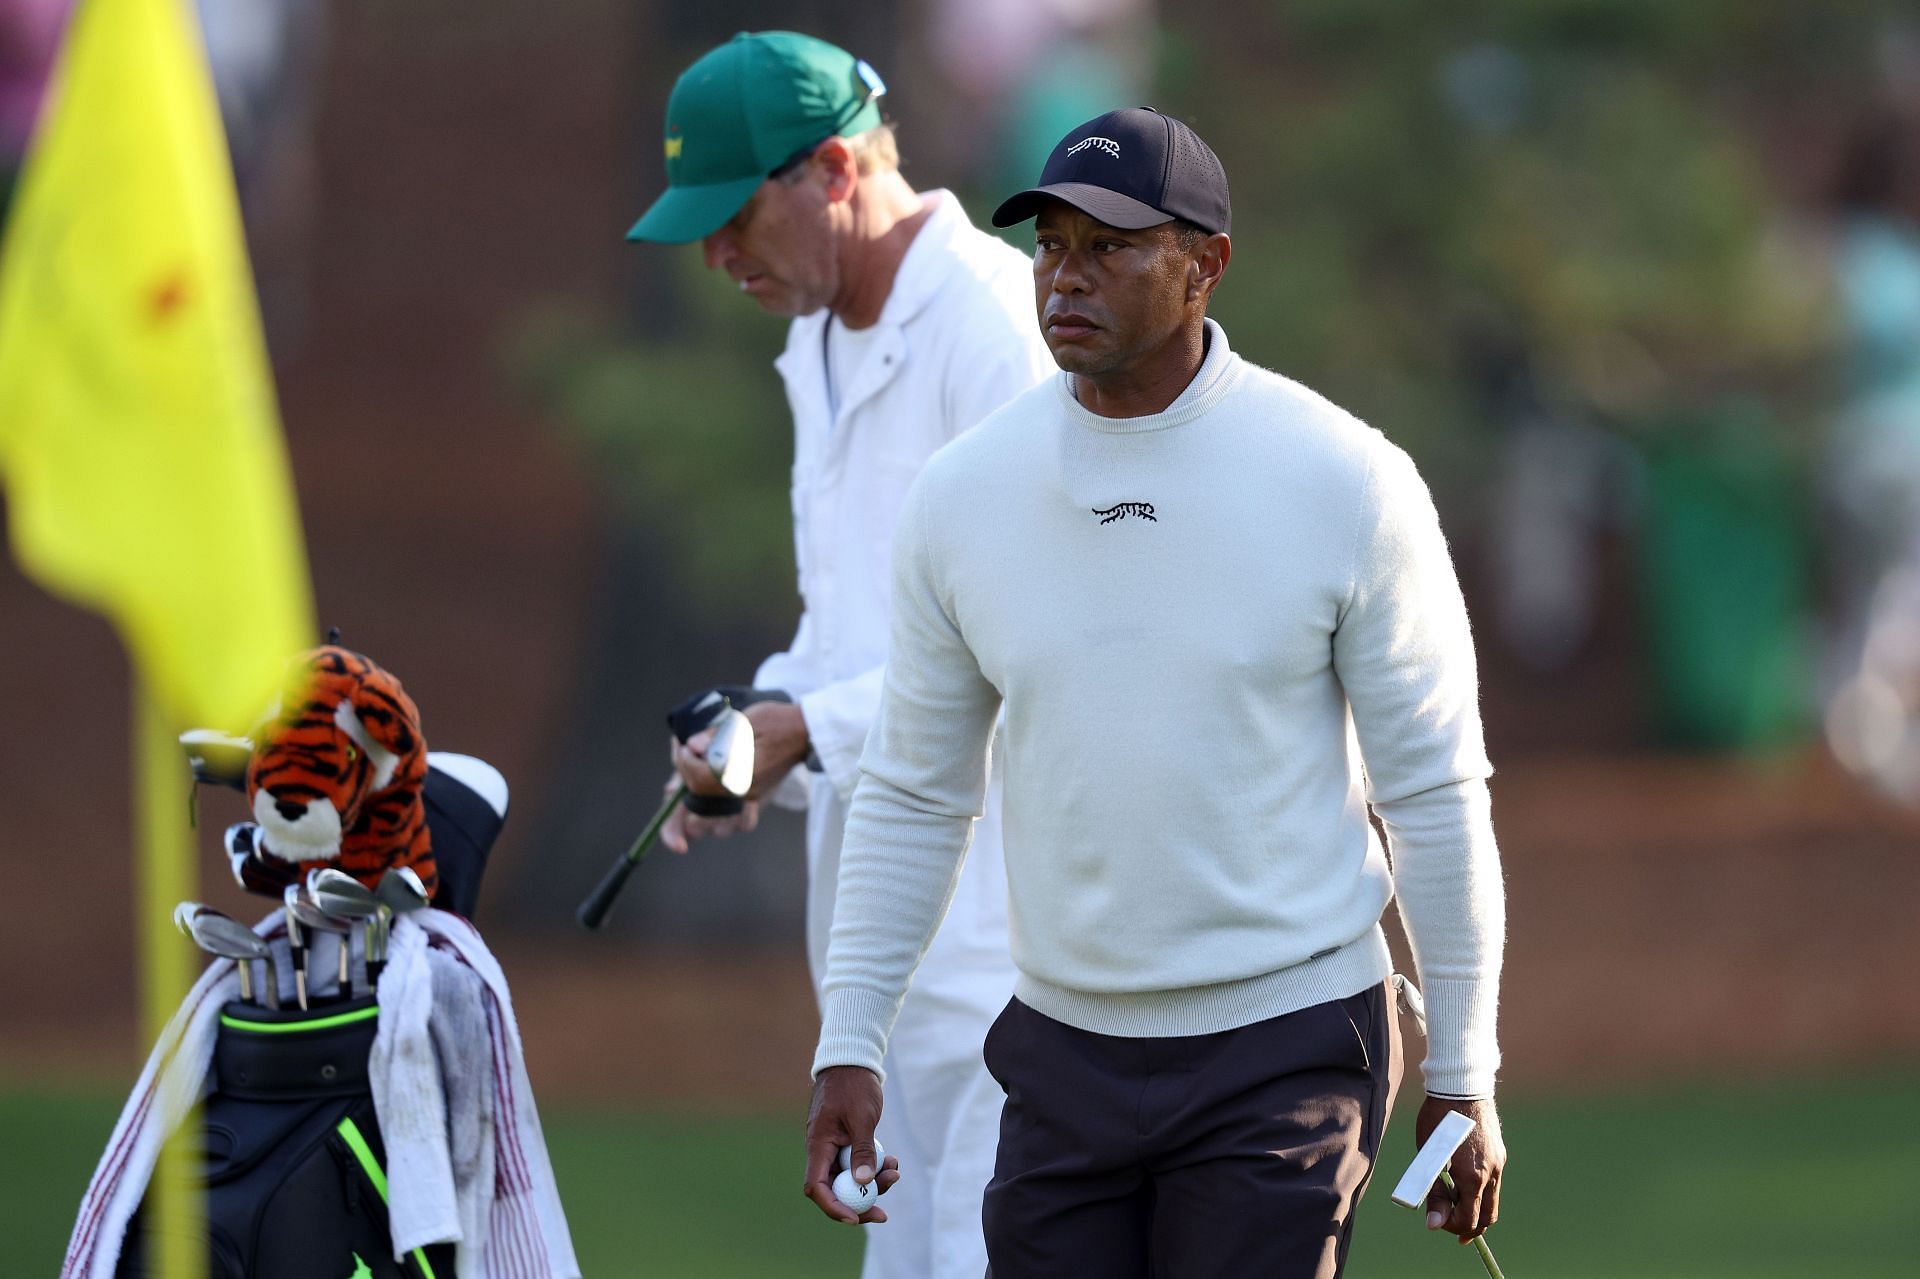 Tiger Woods is at the Masters this weekend